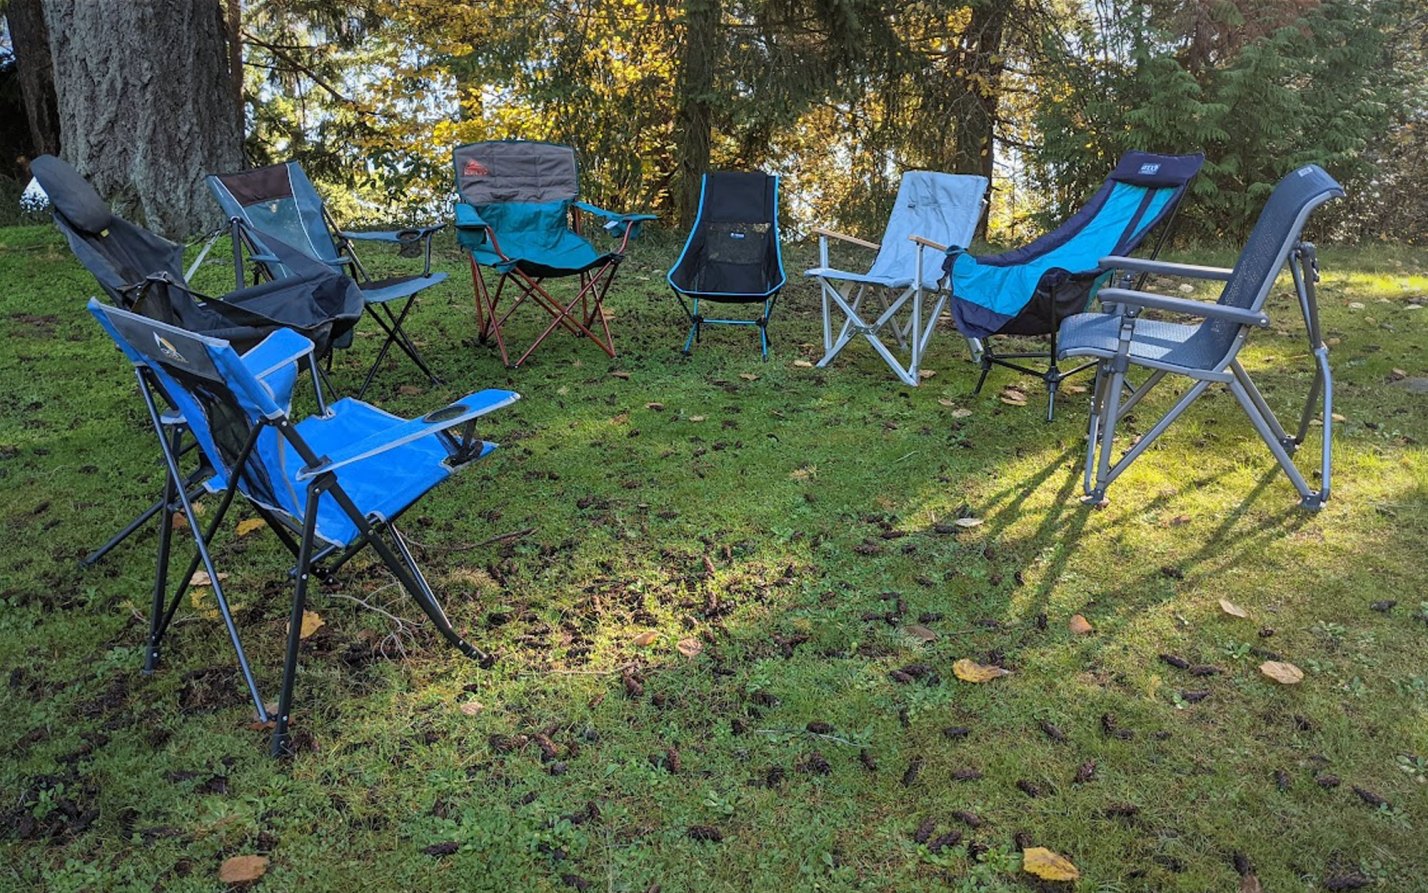 We tested the best camping chairs.